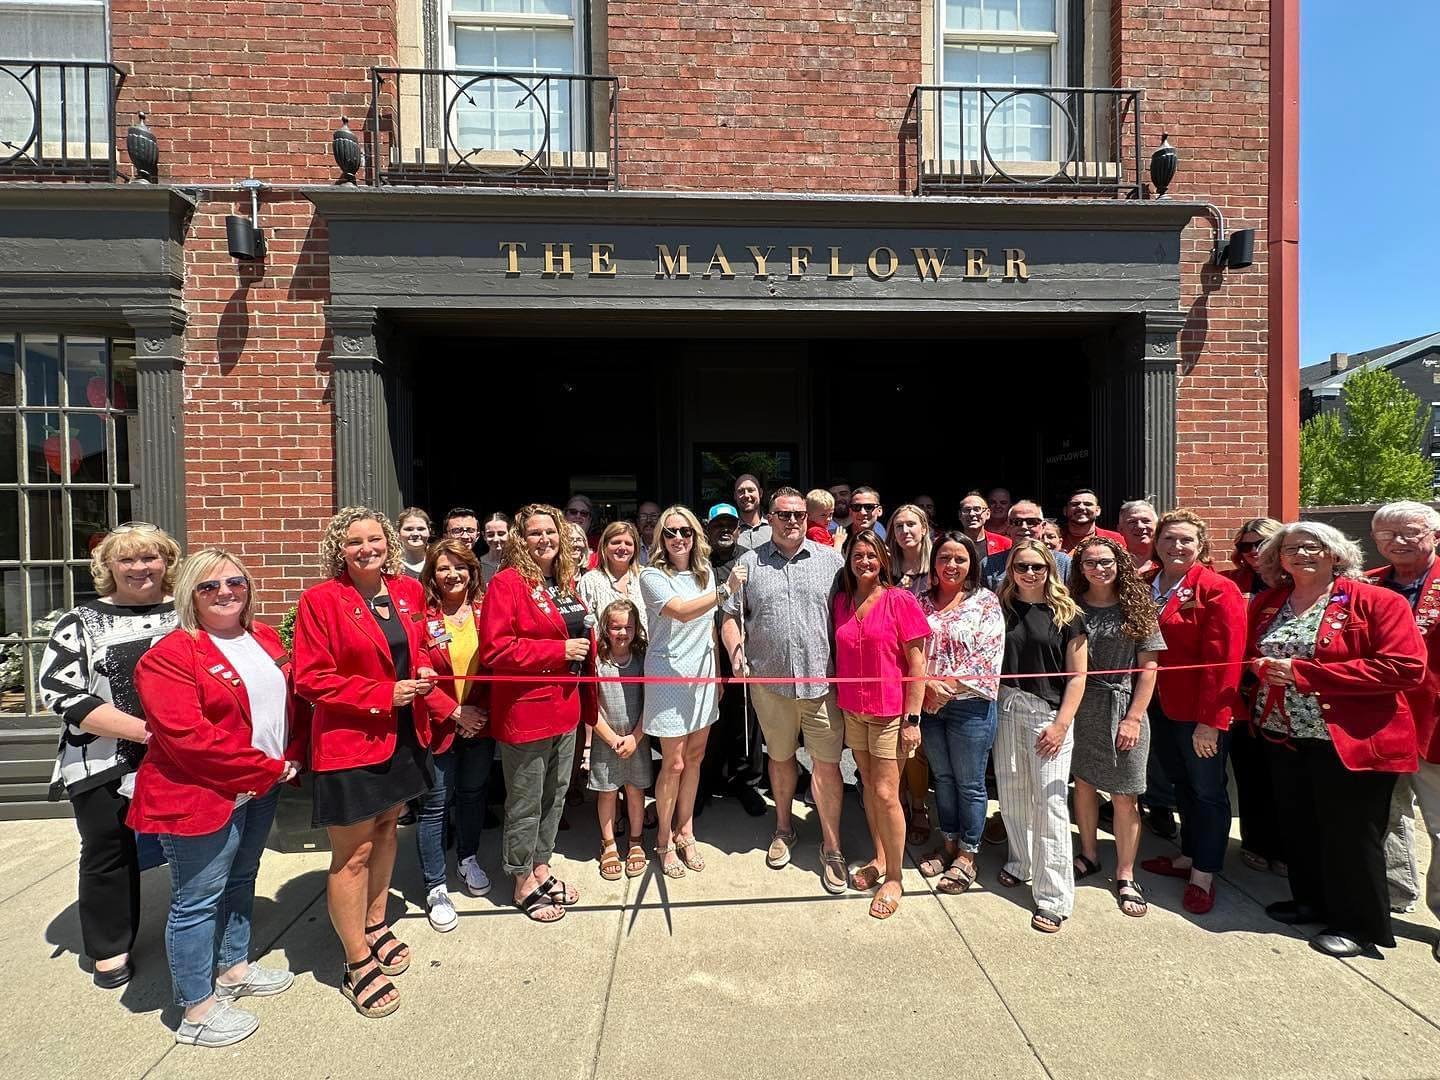 3-2-1...CUT! The Mayflower is now open!

Thank you to each person that came to 9 West Main Street in Troy today to celebrate. To make your reservation for dining, drinks and live music, please visit mayflowertroy.com. We look forward to seeing you so